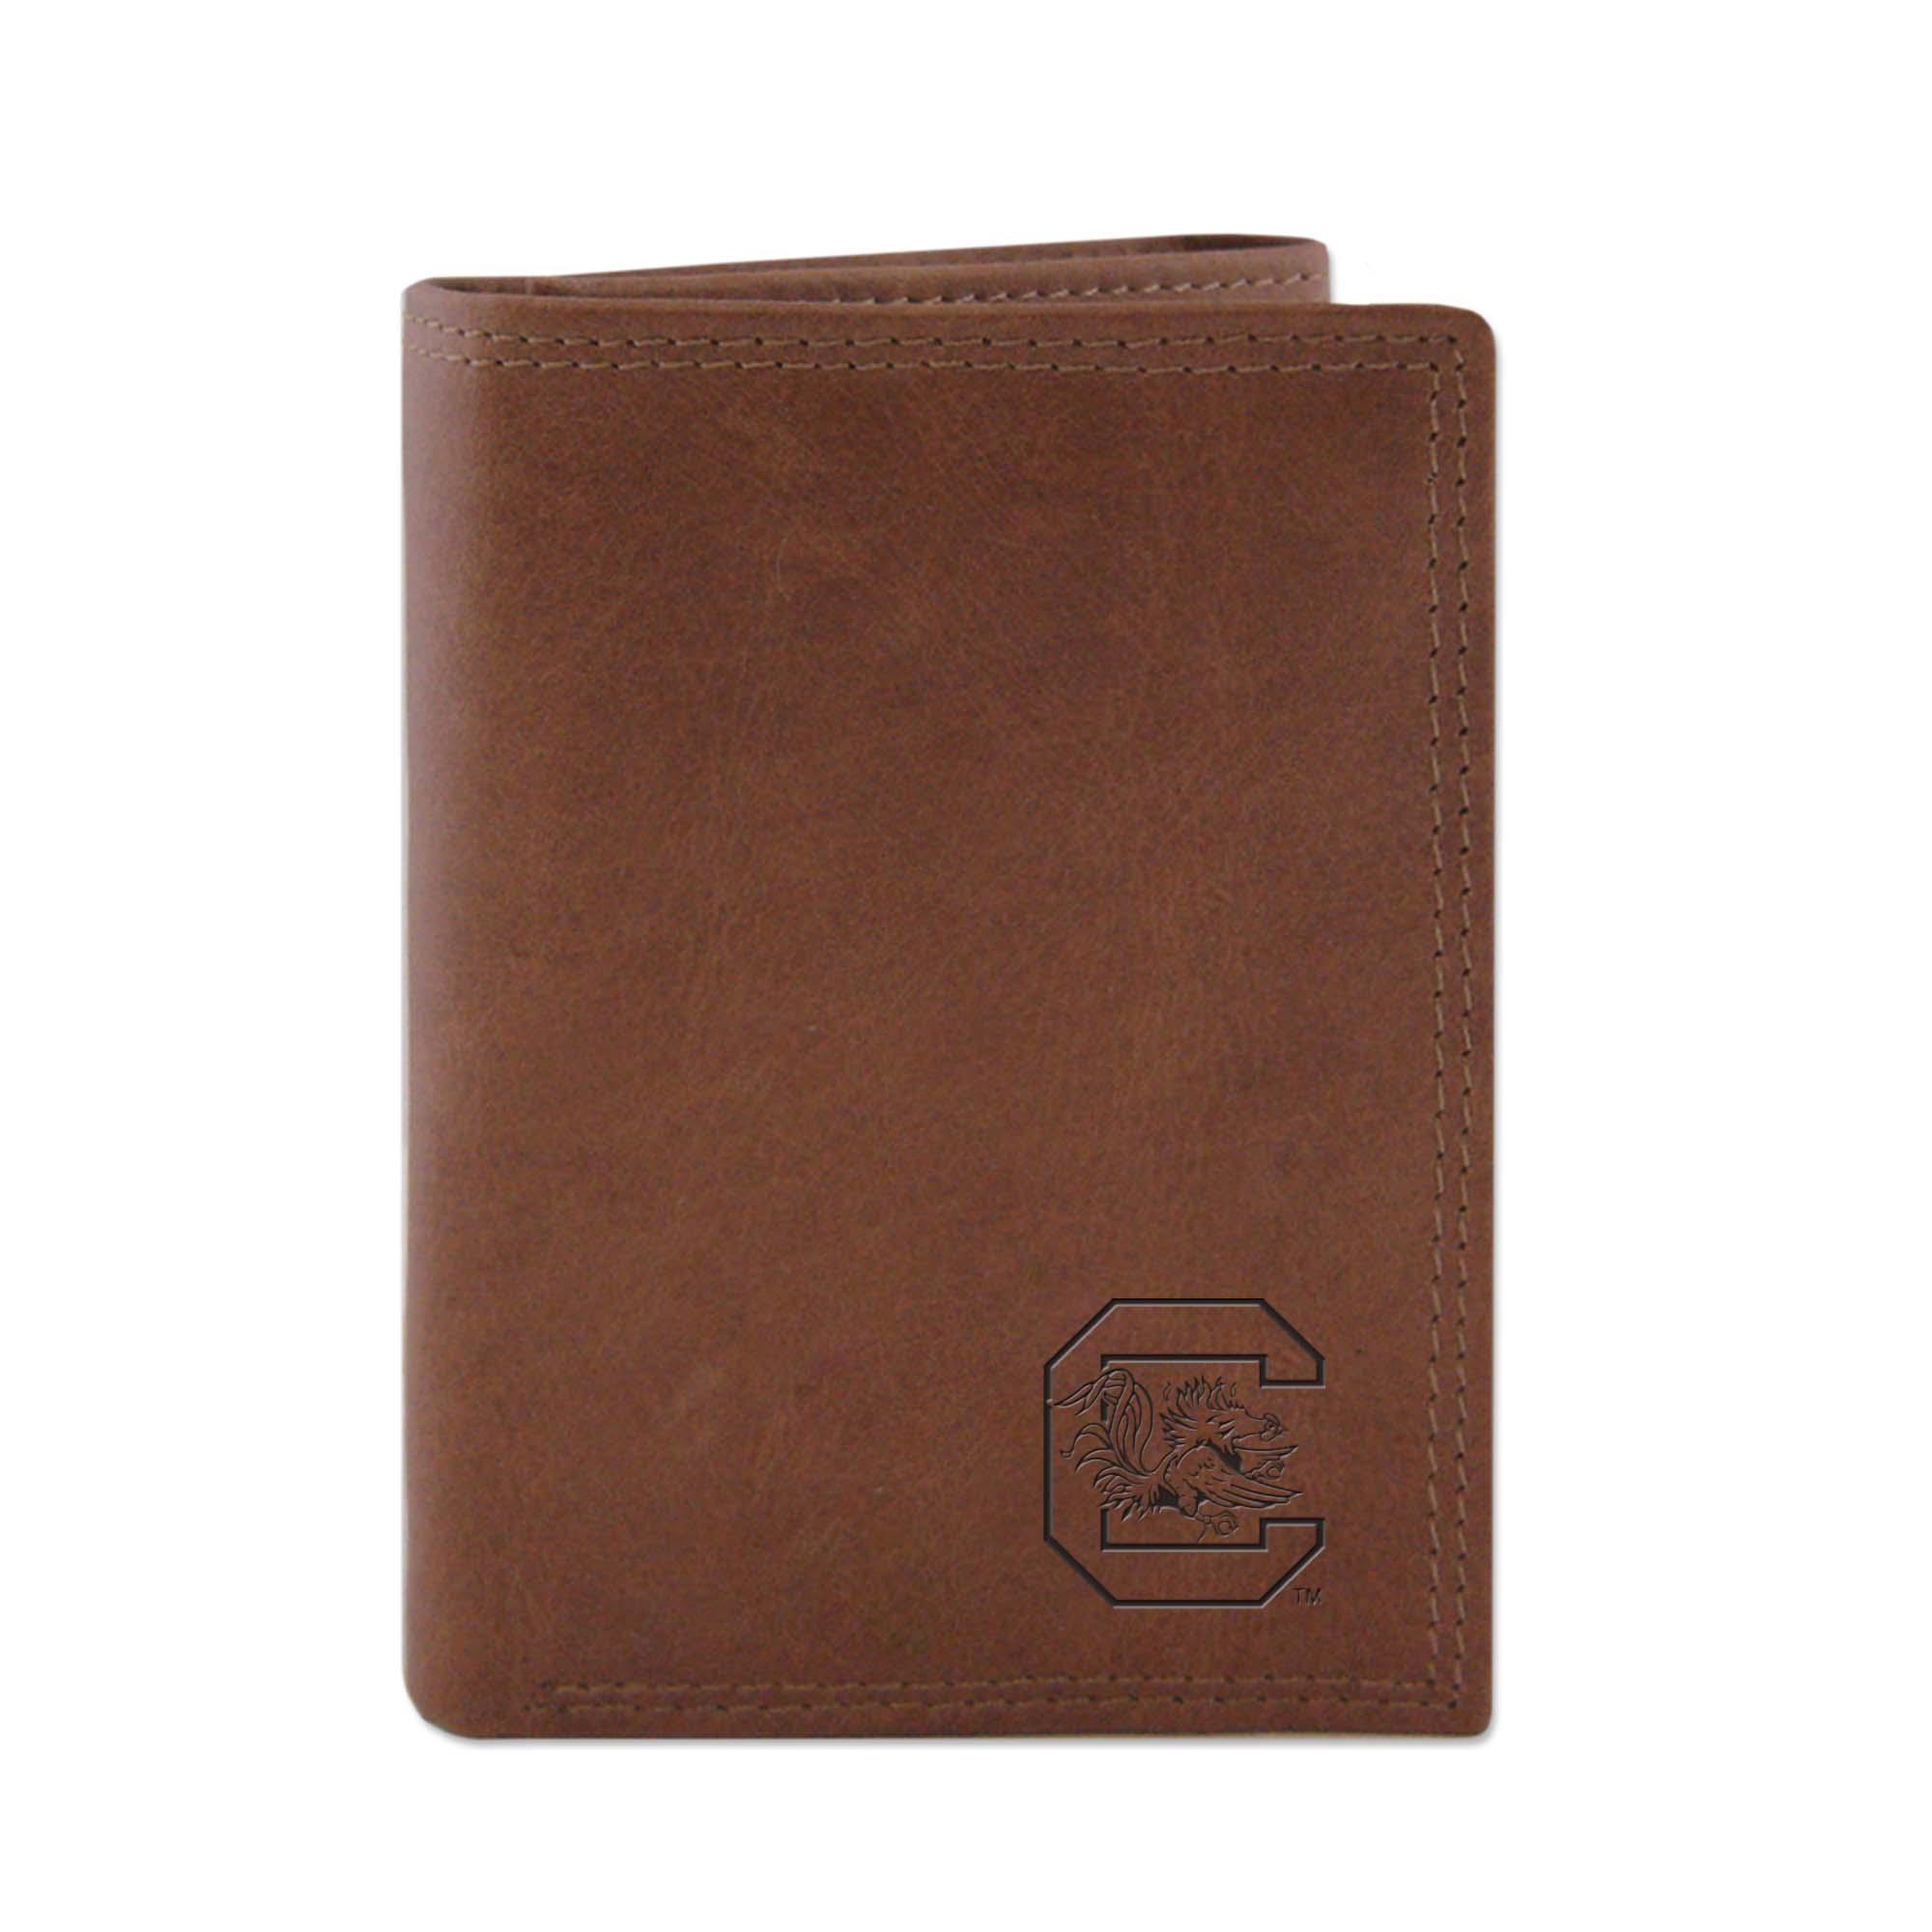 USC Embossed Leather Trifold